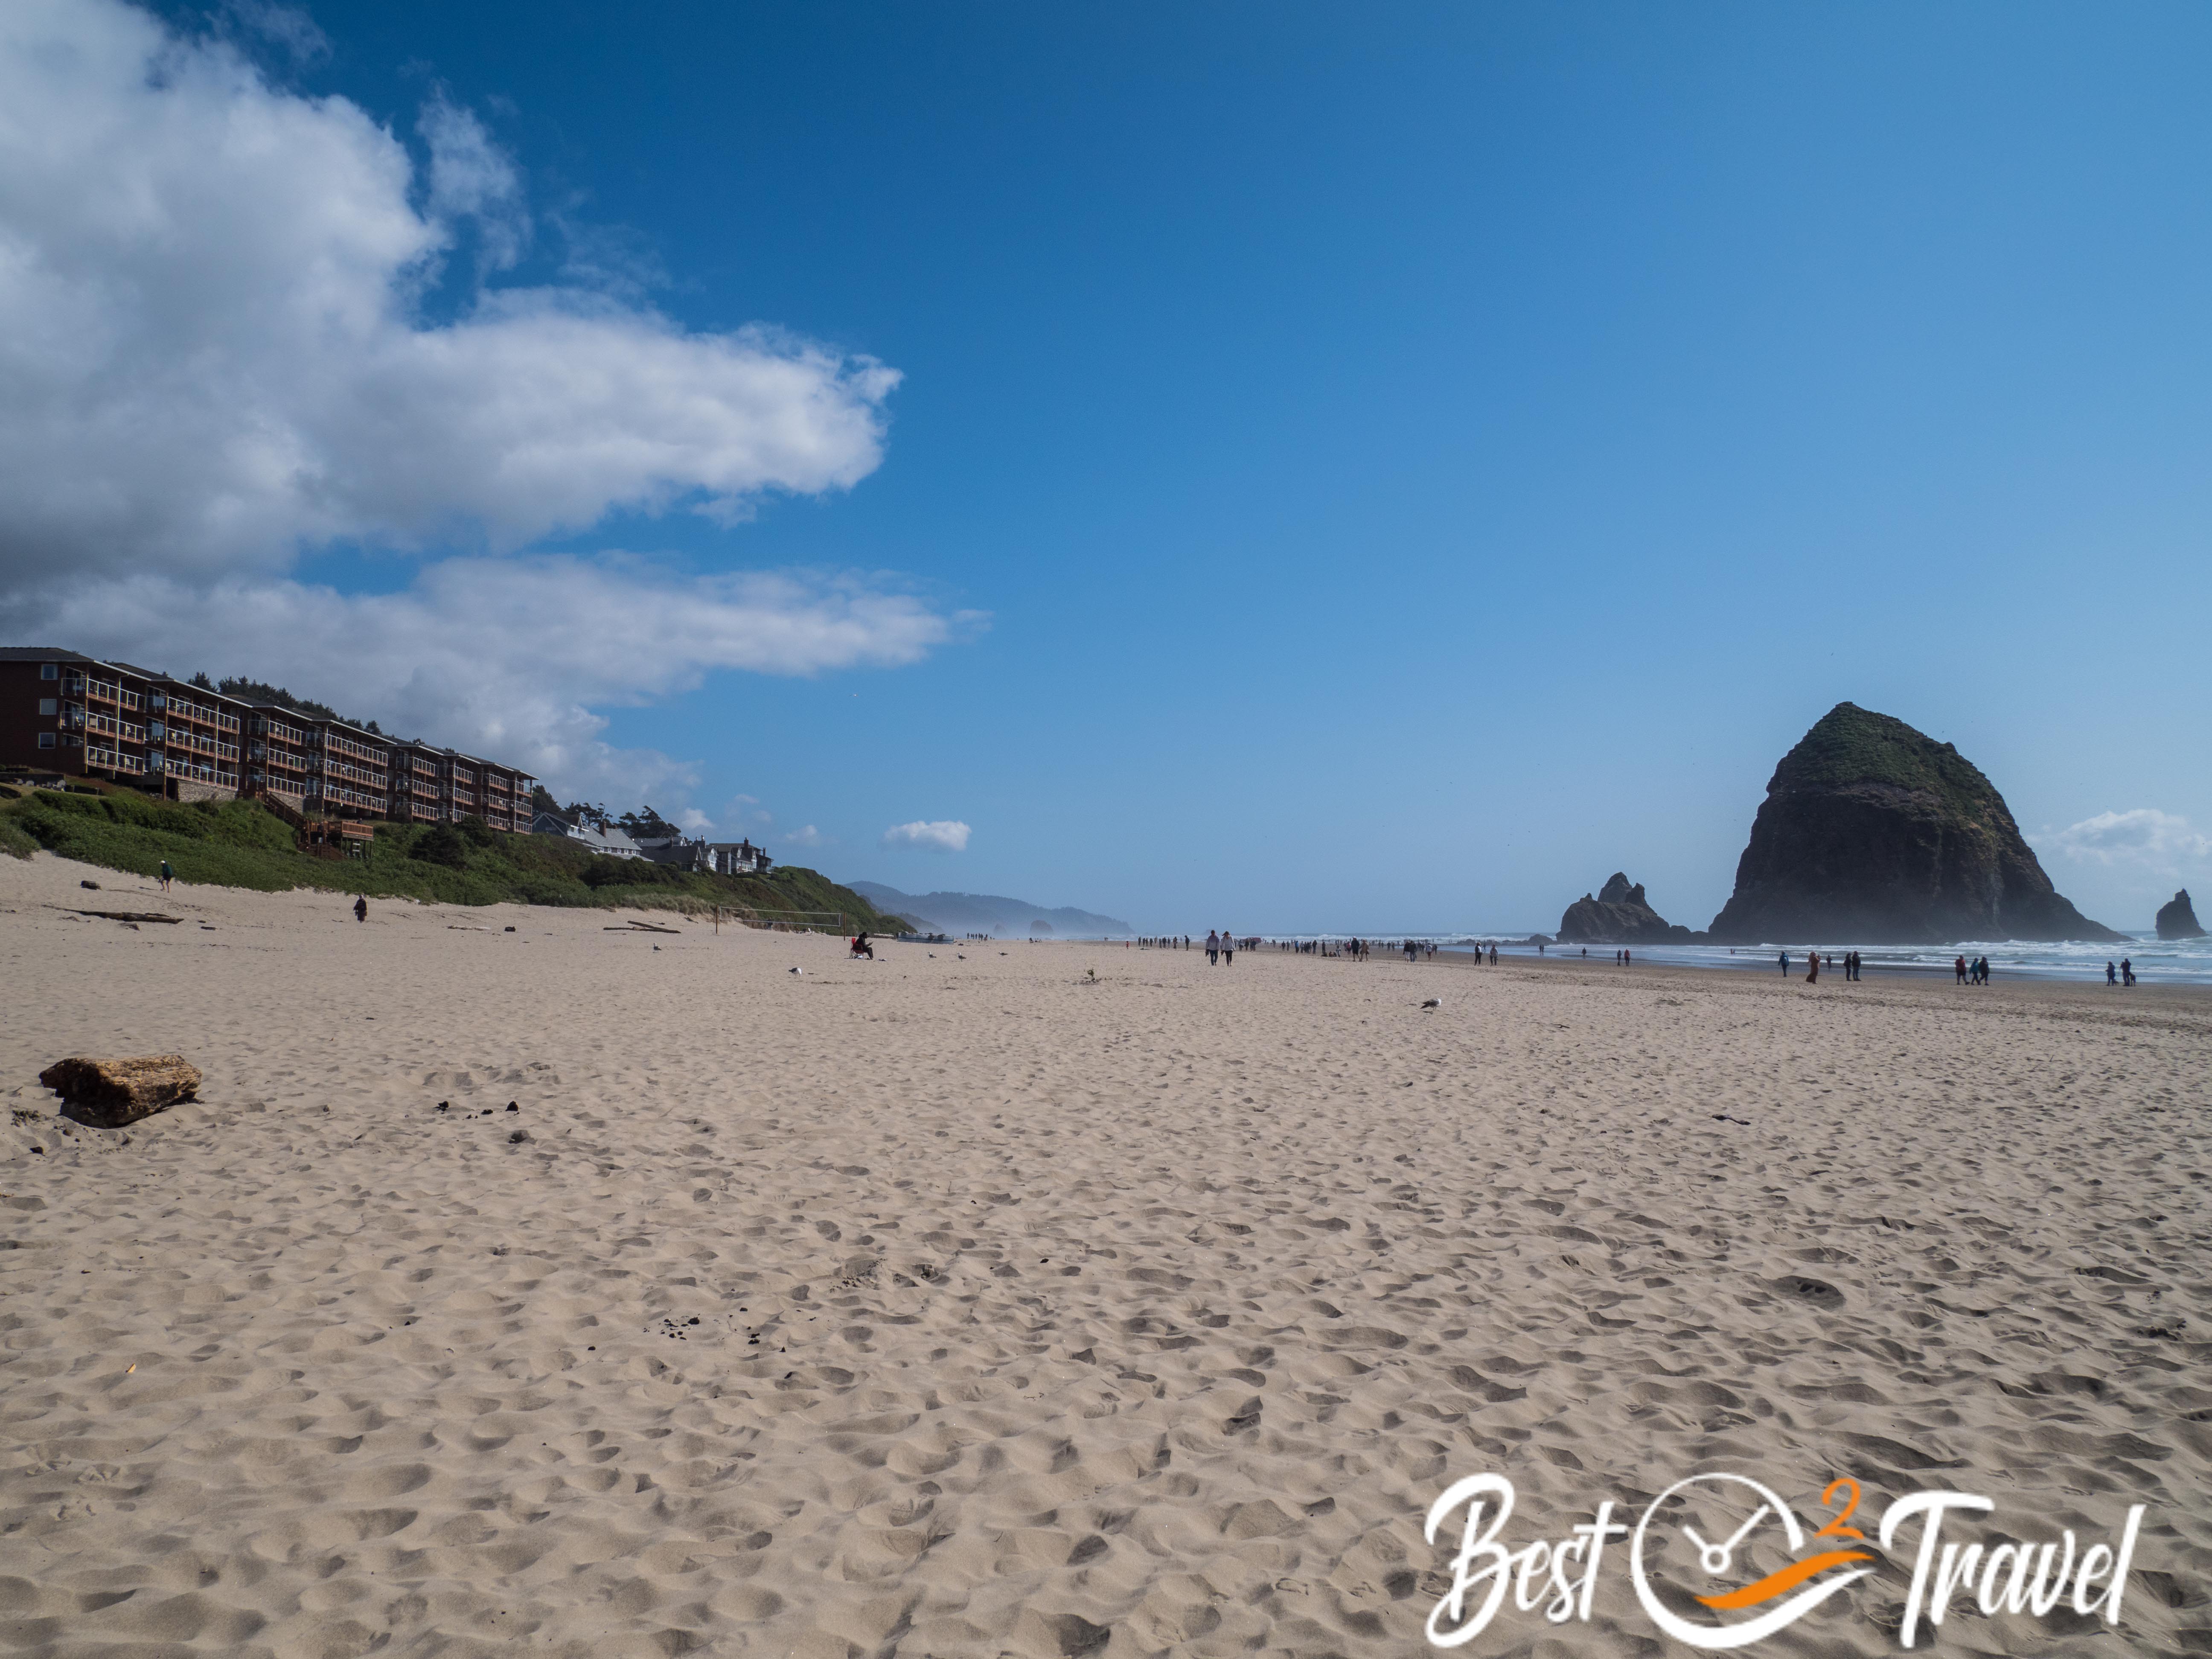 The best located hotel in Cannon Beach at the beach and Haystack Rock.